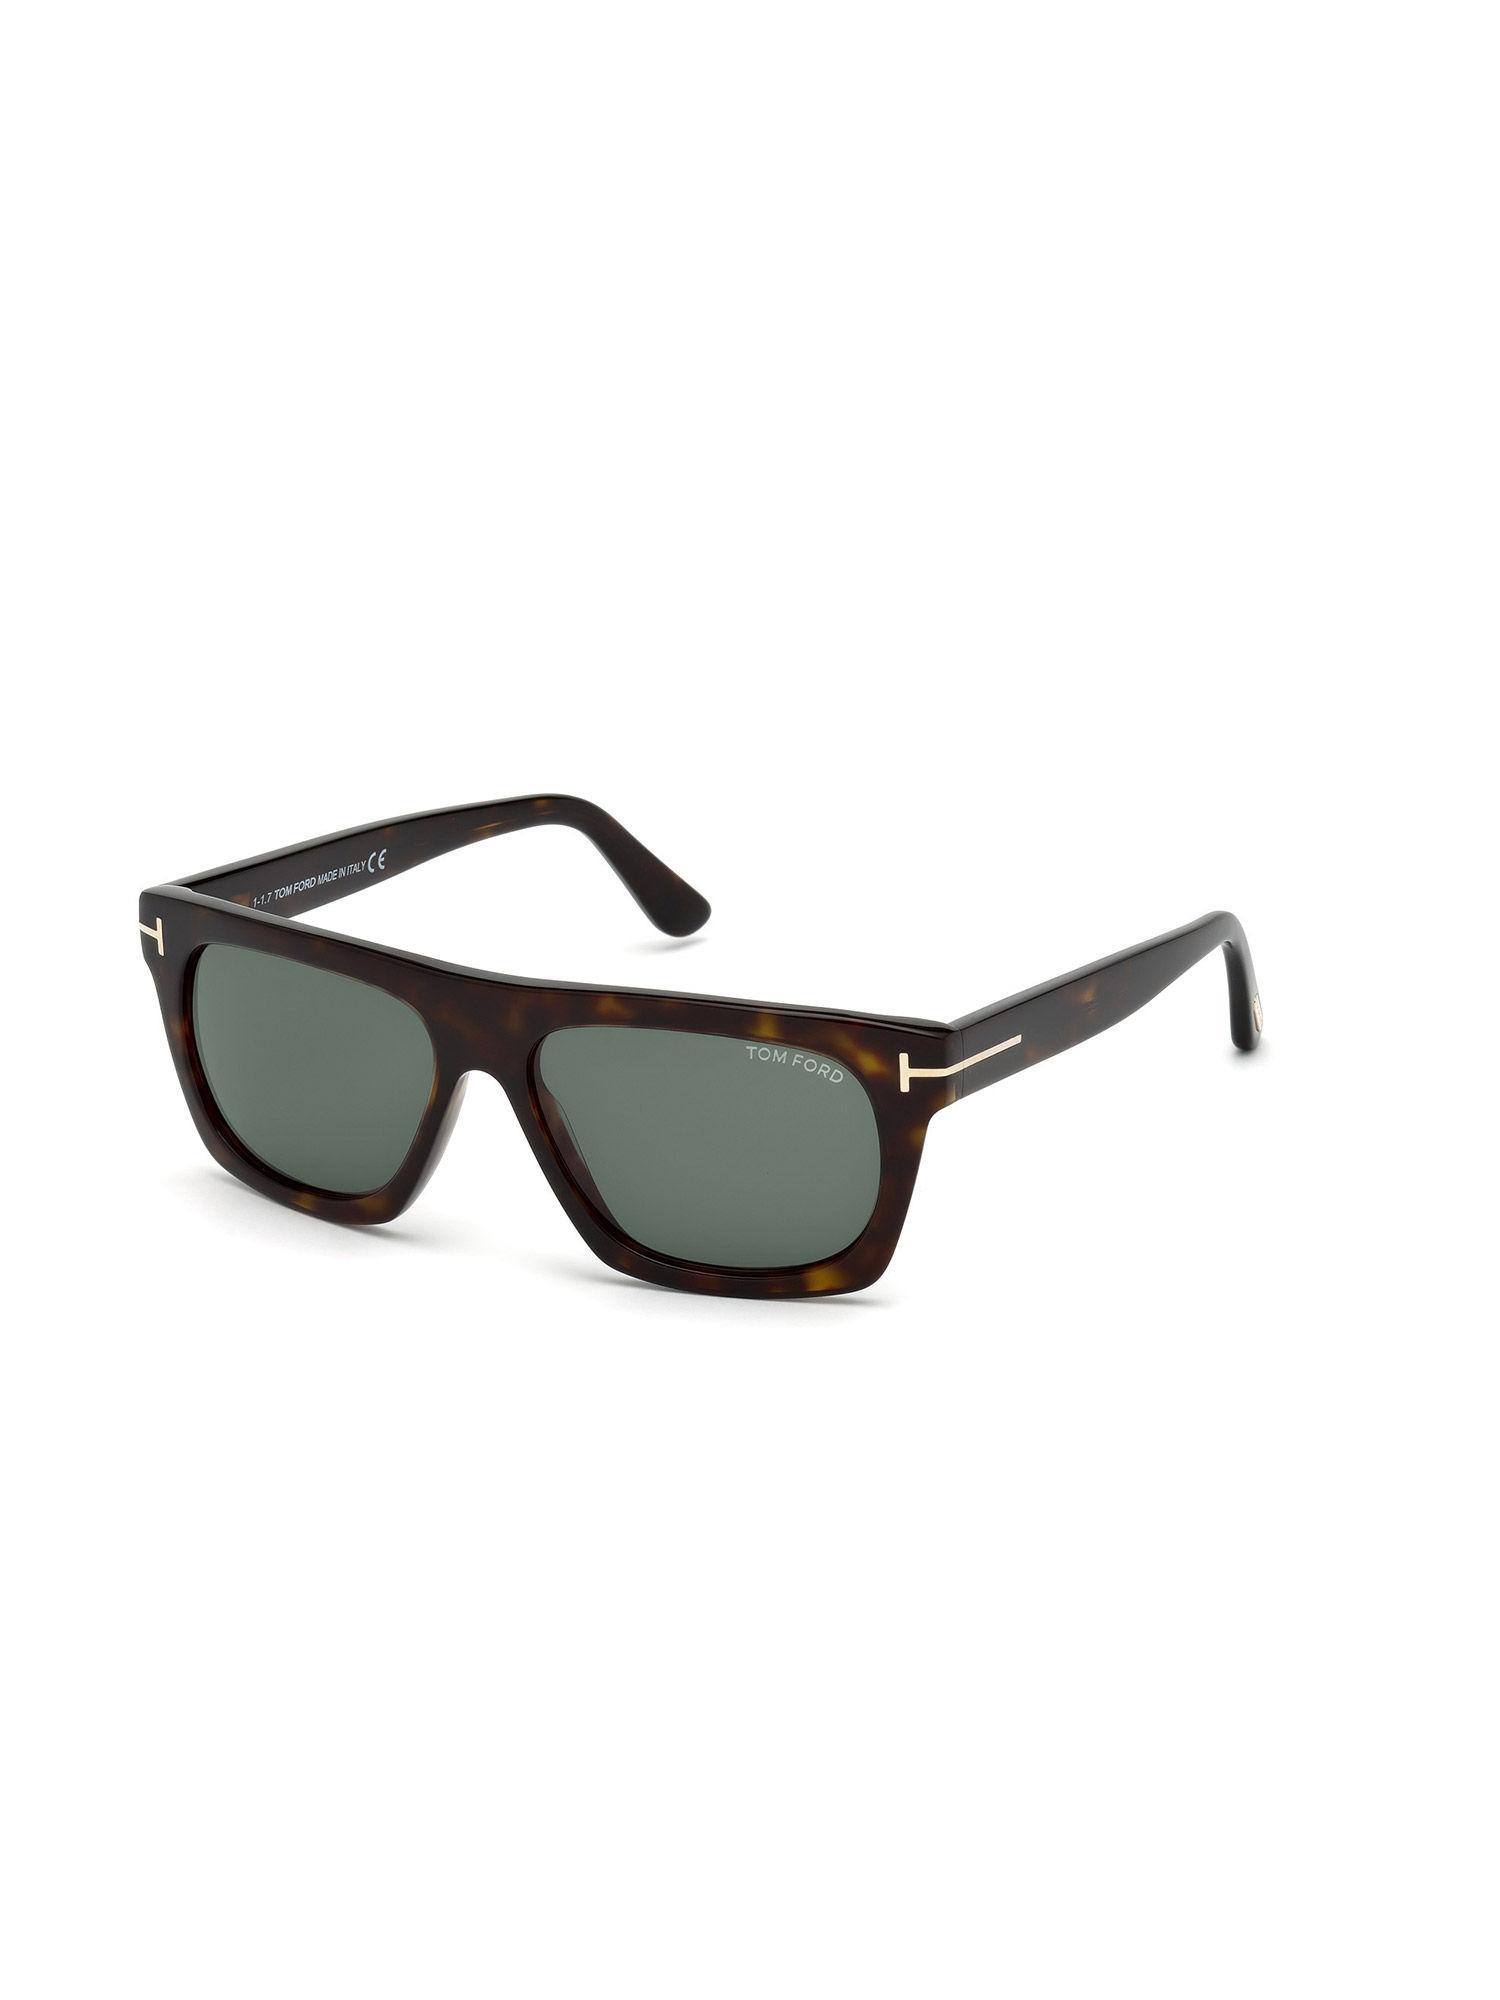 ft0592-55-55n-is-a-selection-of-iconic-aviator-shapes-in-premium-sunglasses